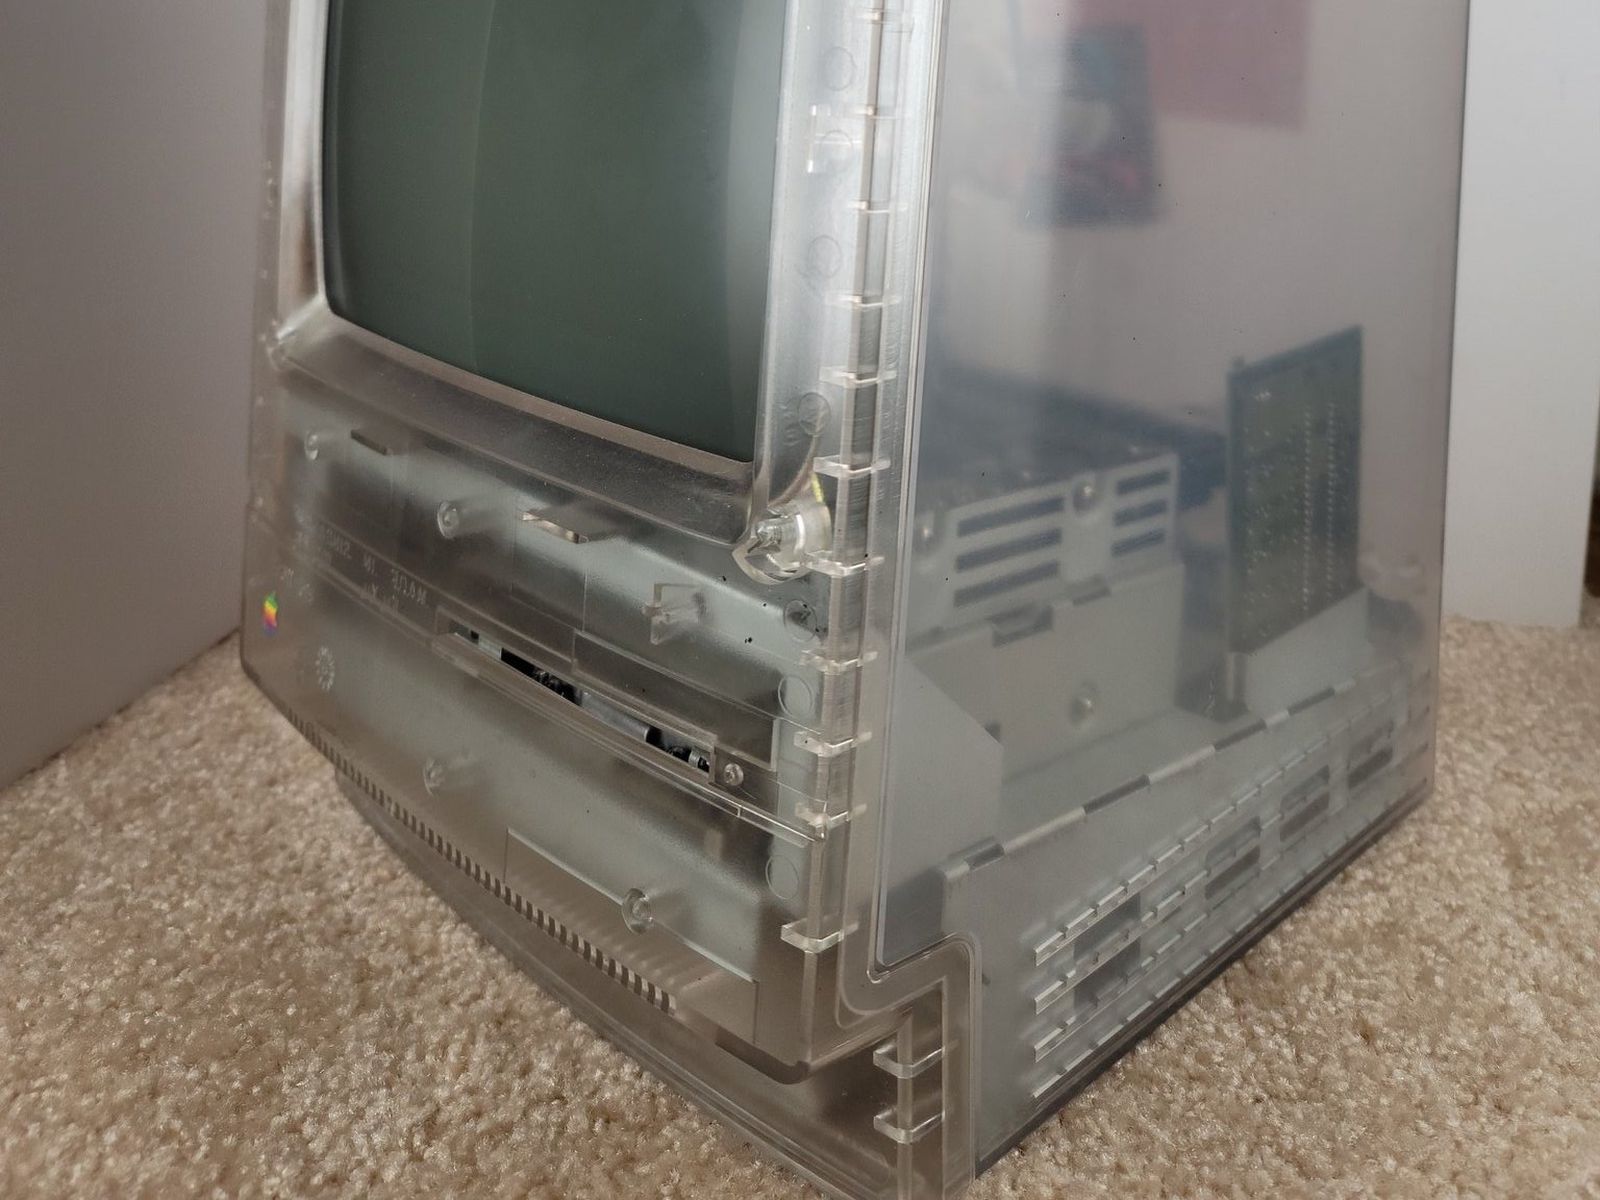 Images of Prototype Apple Macintosh With Clear Casing Shared